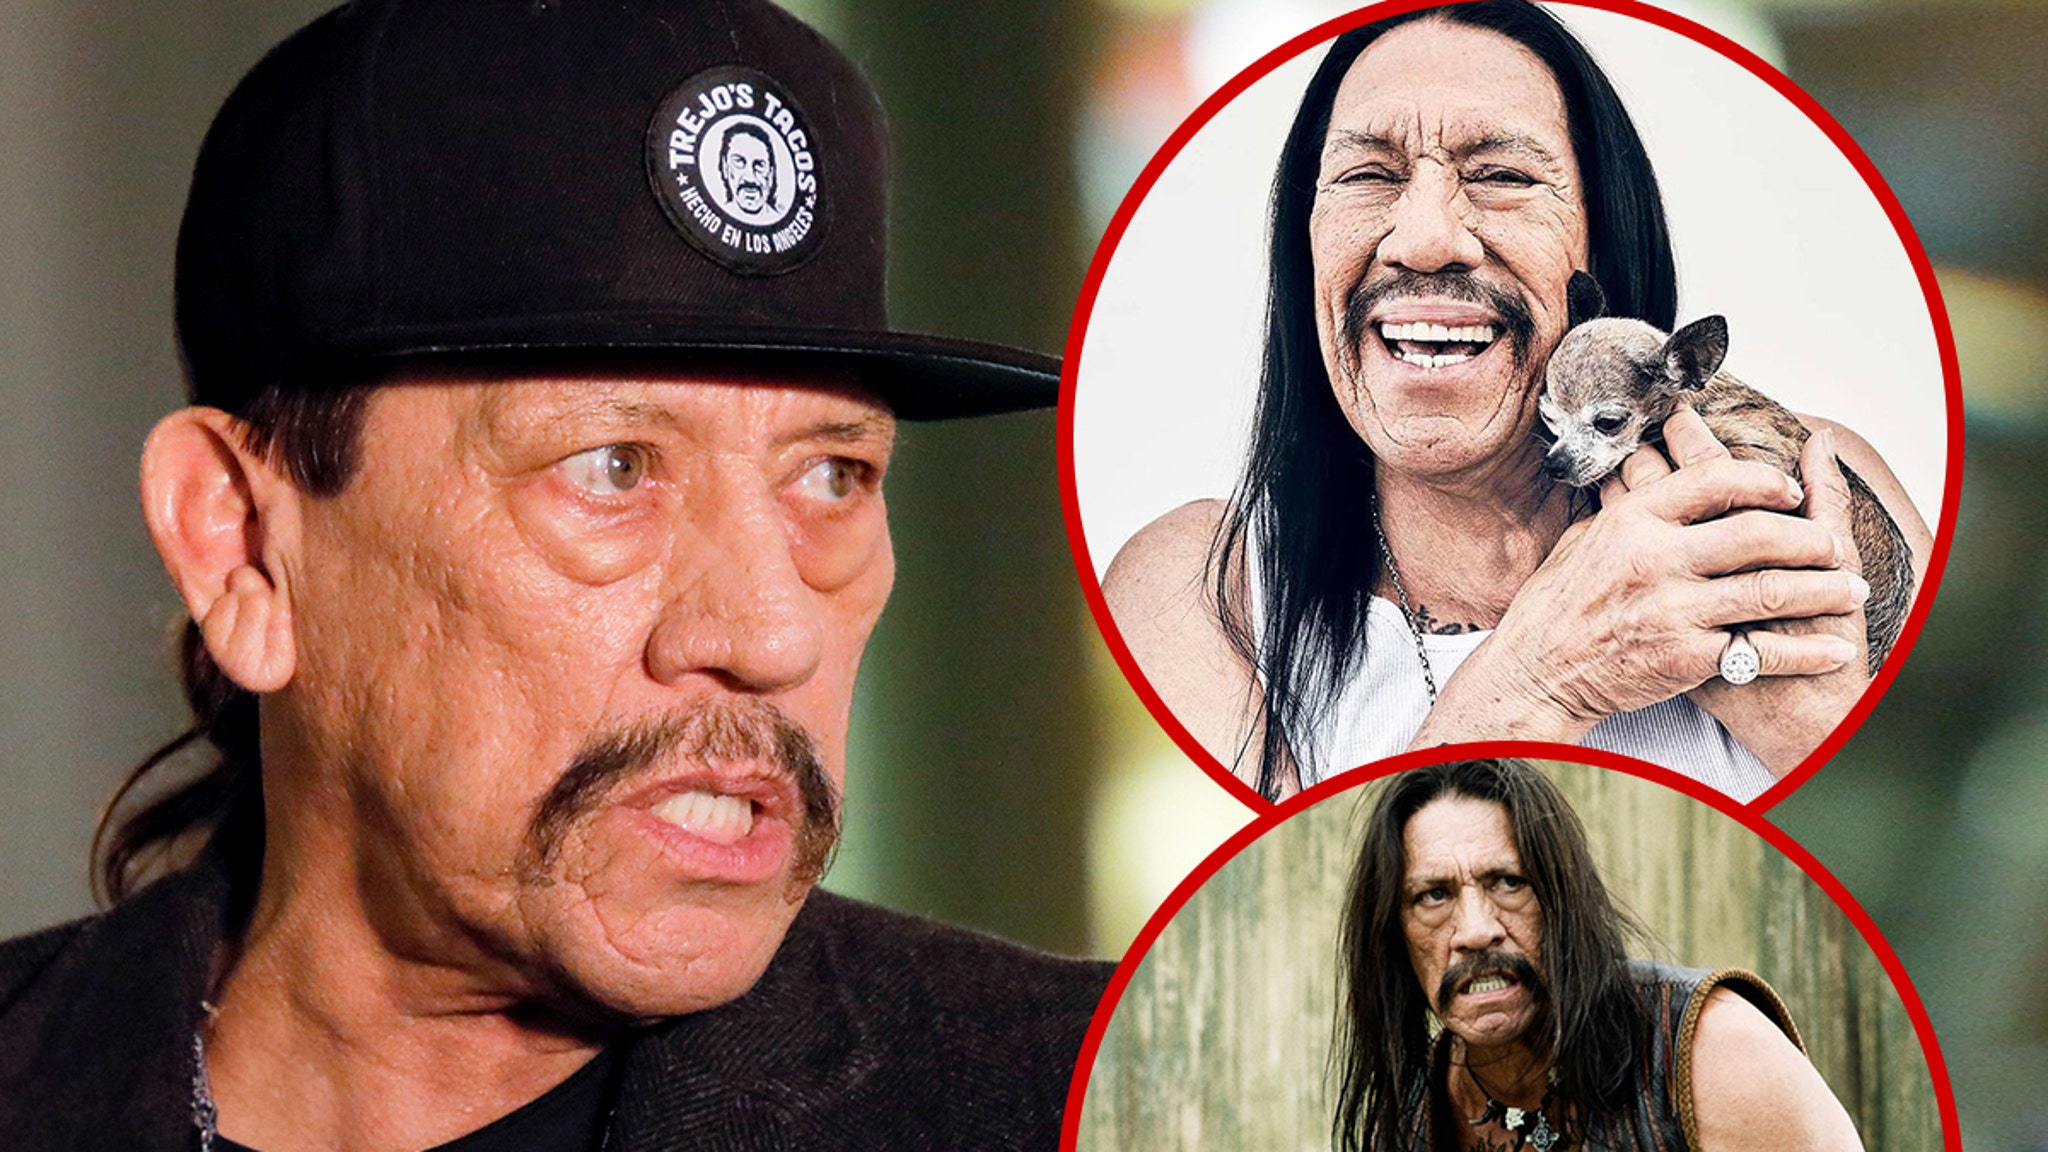 Danny Trejo's cool chihuahua reminded him of a classic character